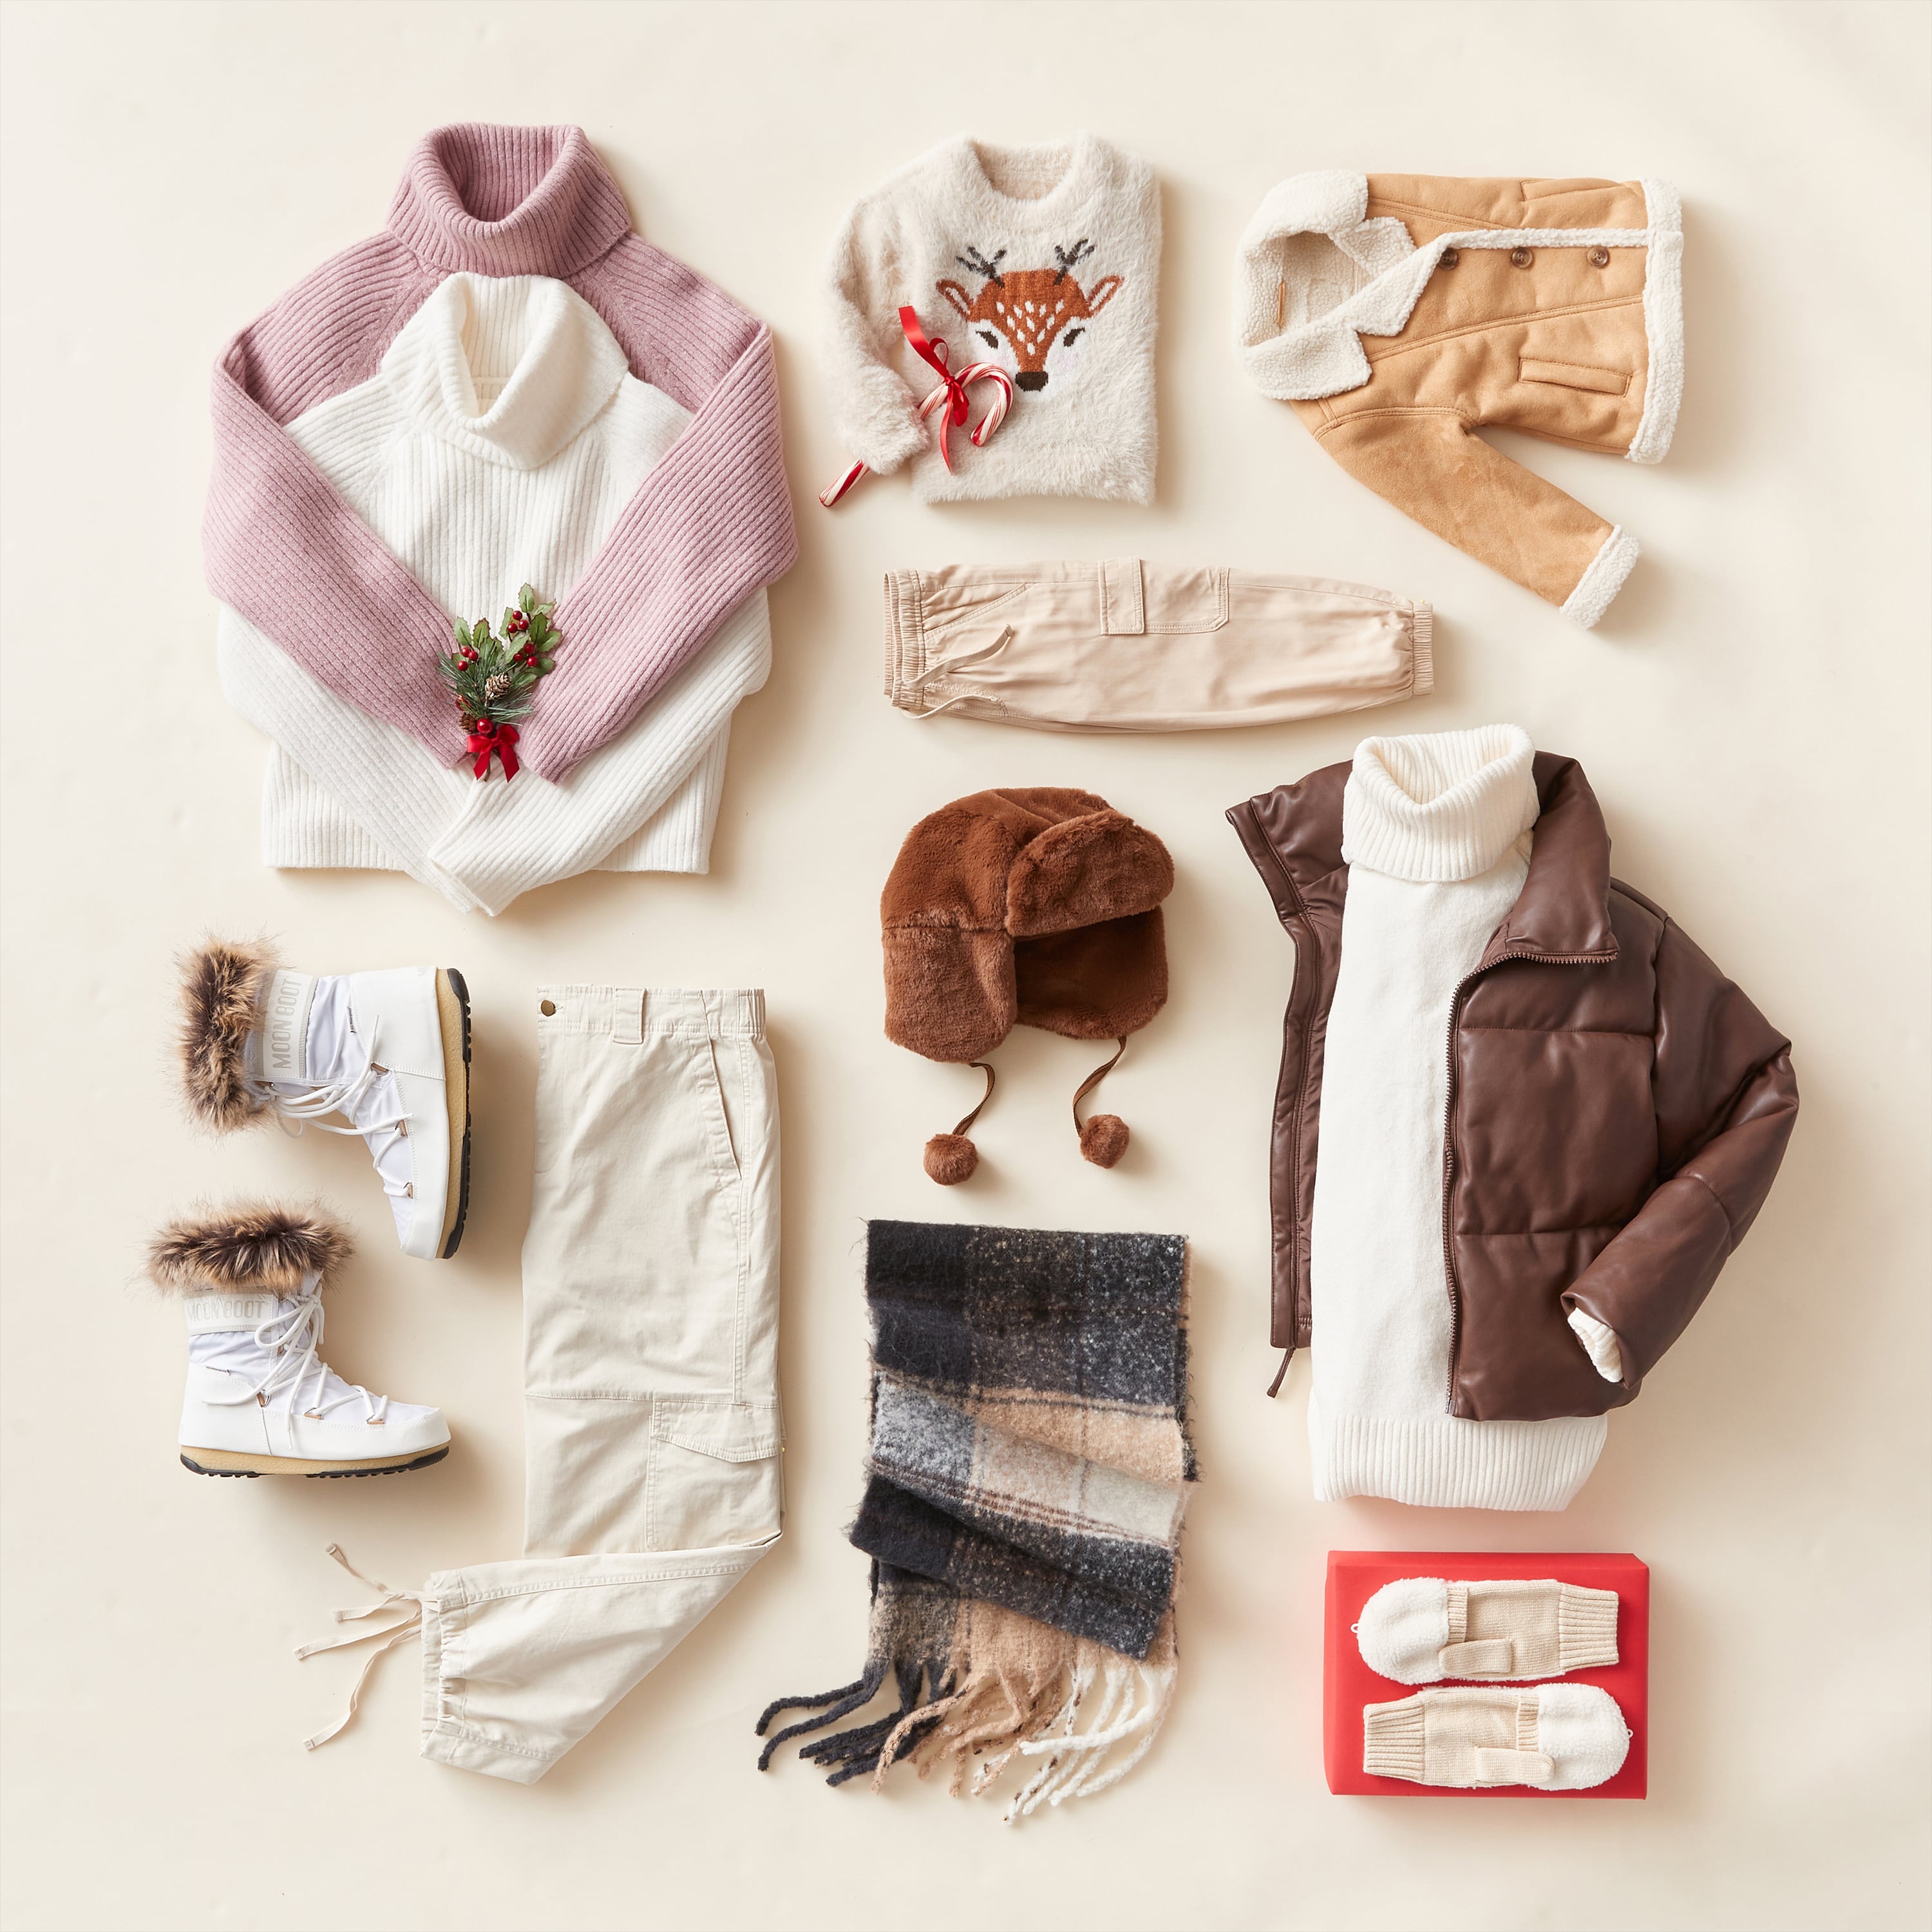 Last Minute Gifts for Her Under $25 - Cashmere & Jeans